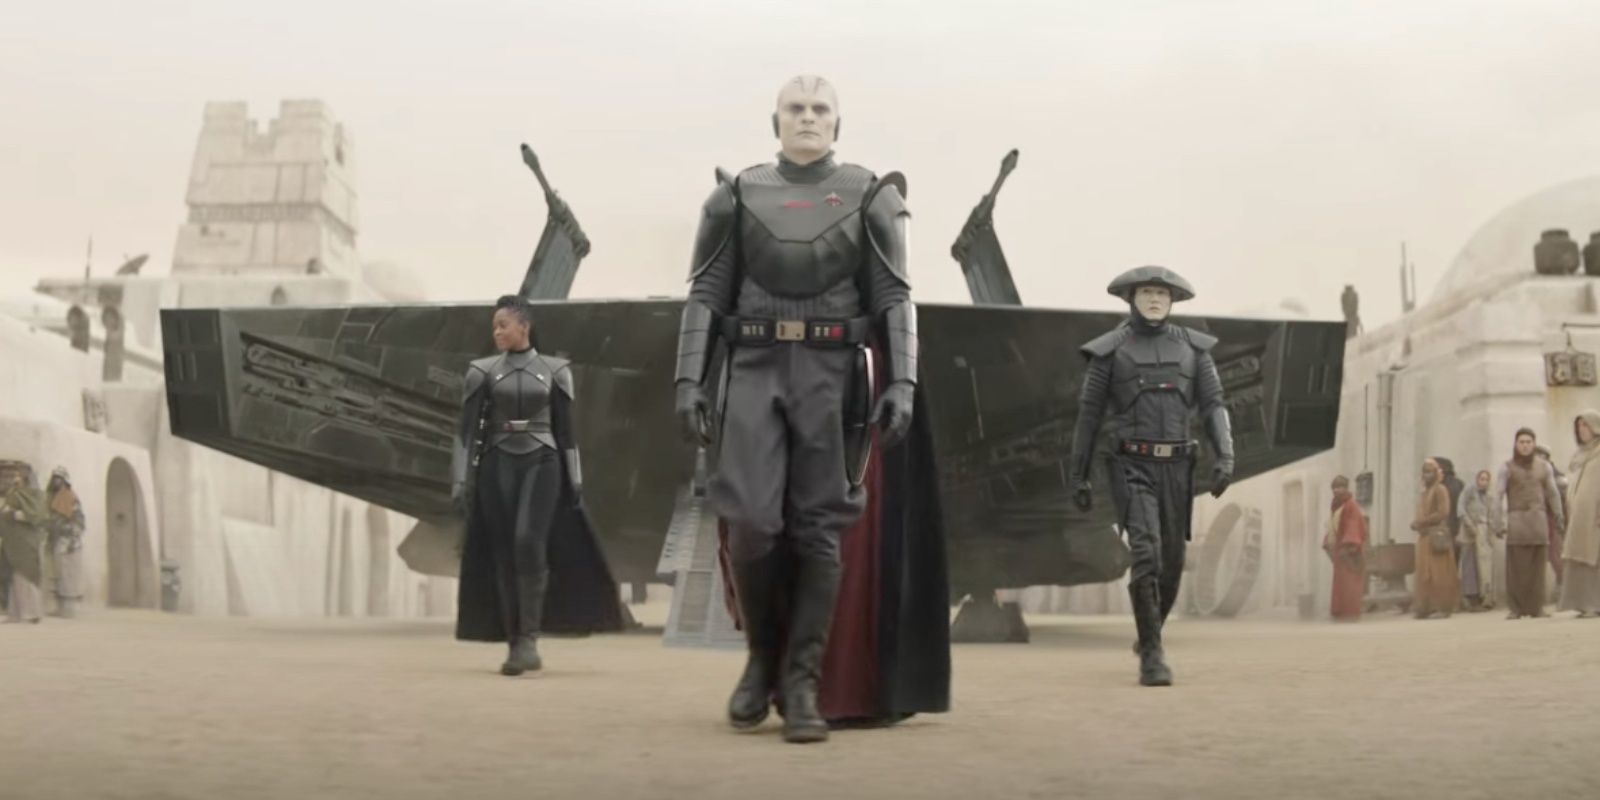 A still image showing the Inquisitors in Episode 1 of Obi-Wan Kenobi